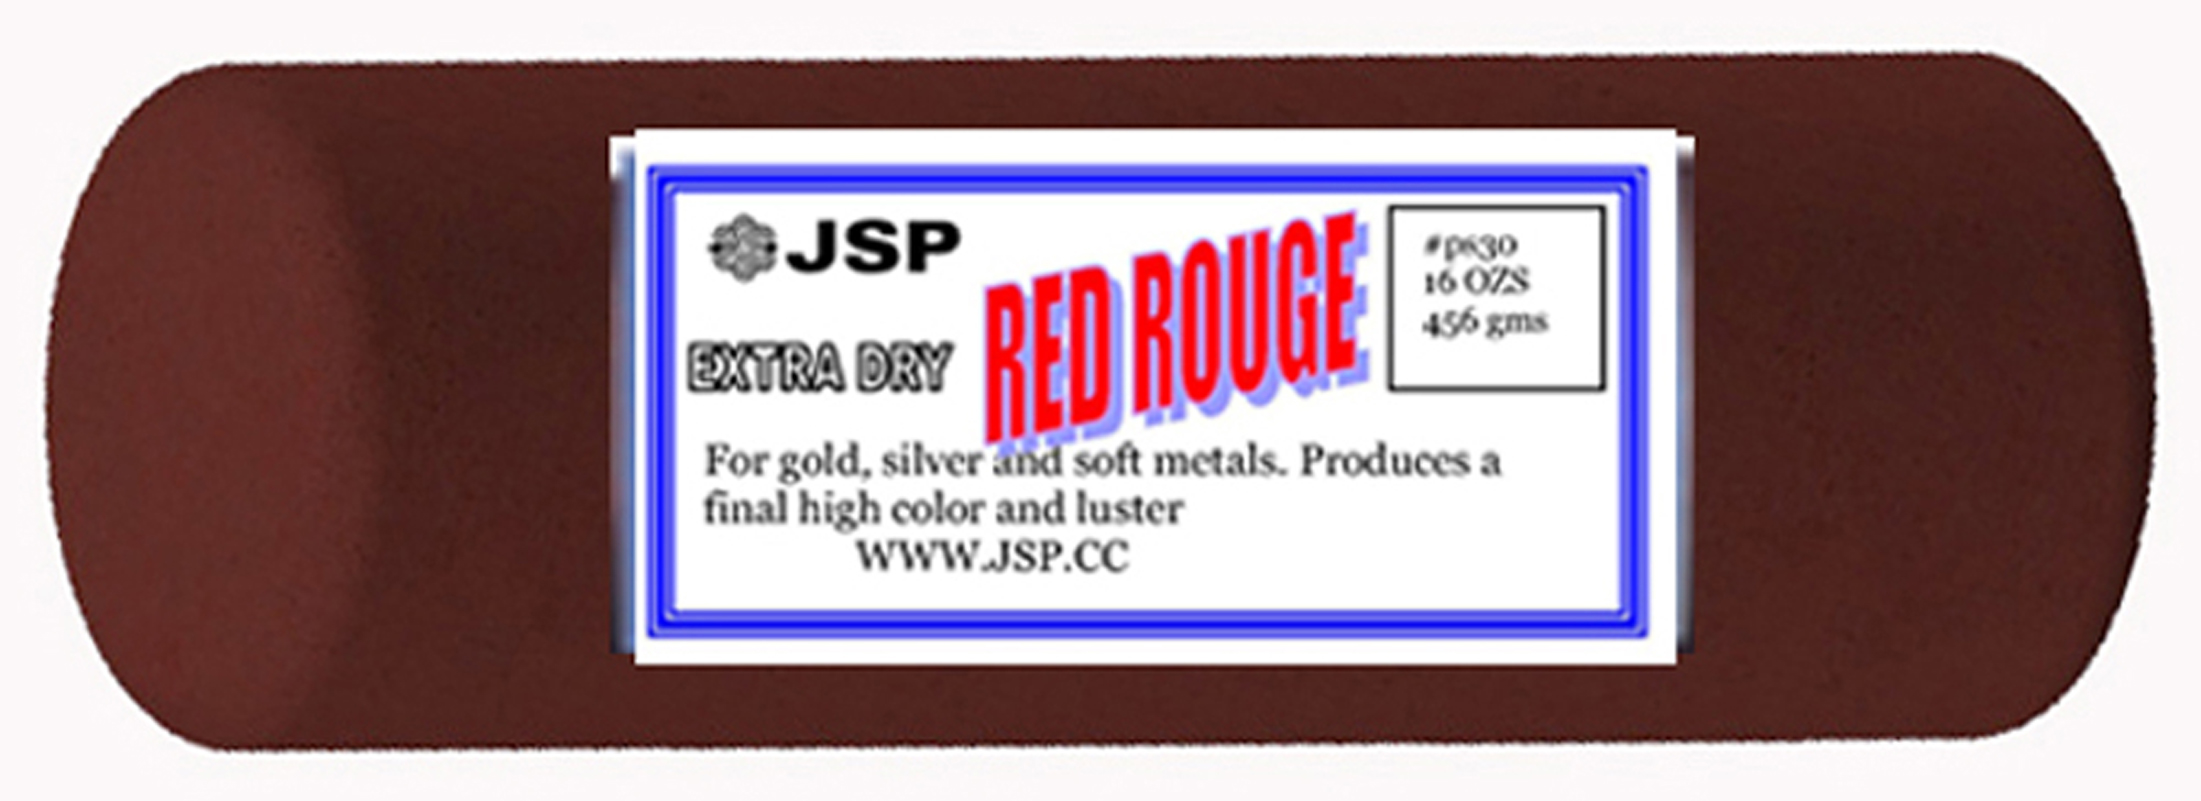 RED ROUGE BAR ROLLED ROUND 1 LB